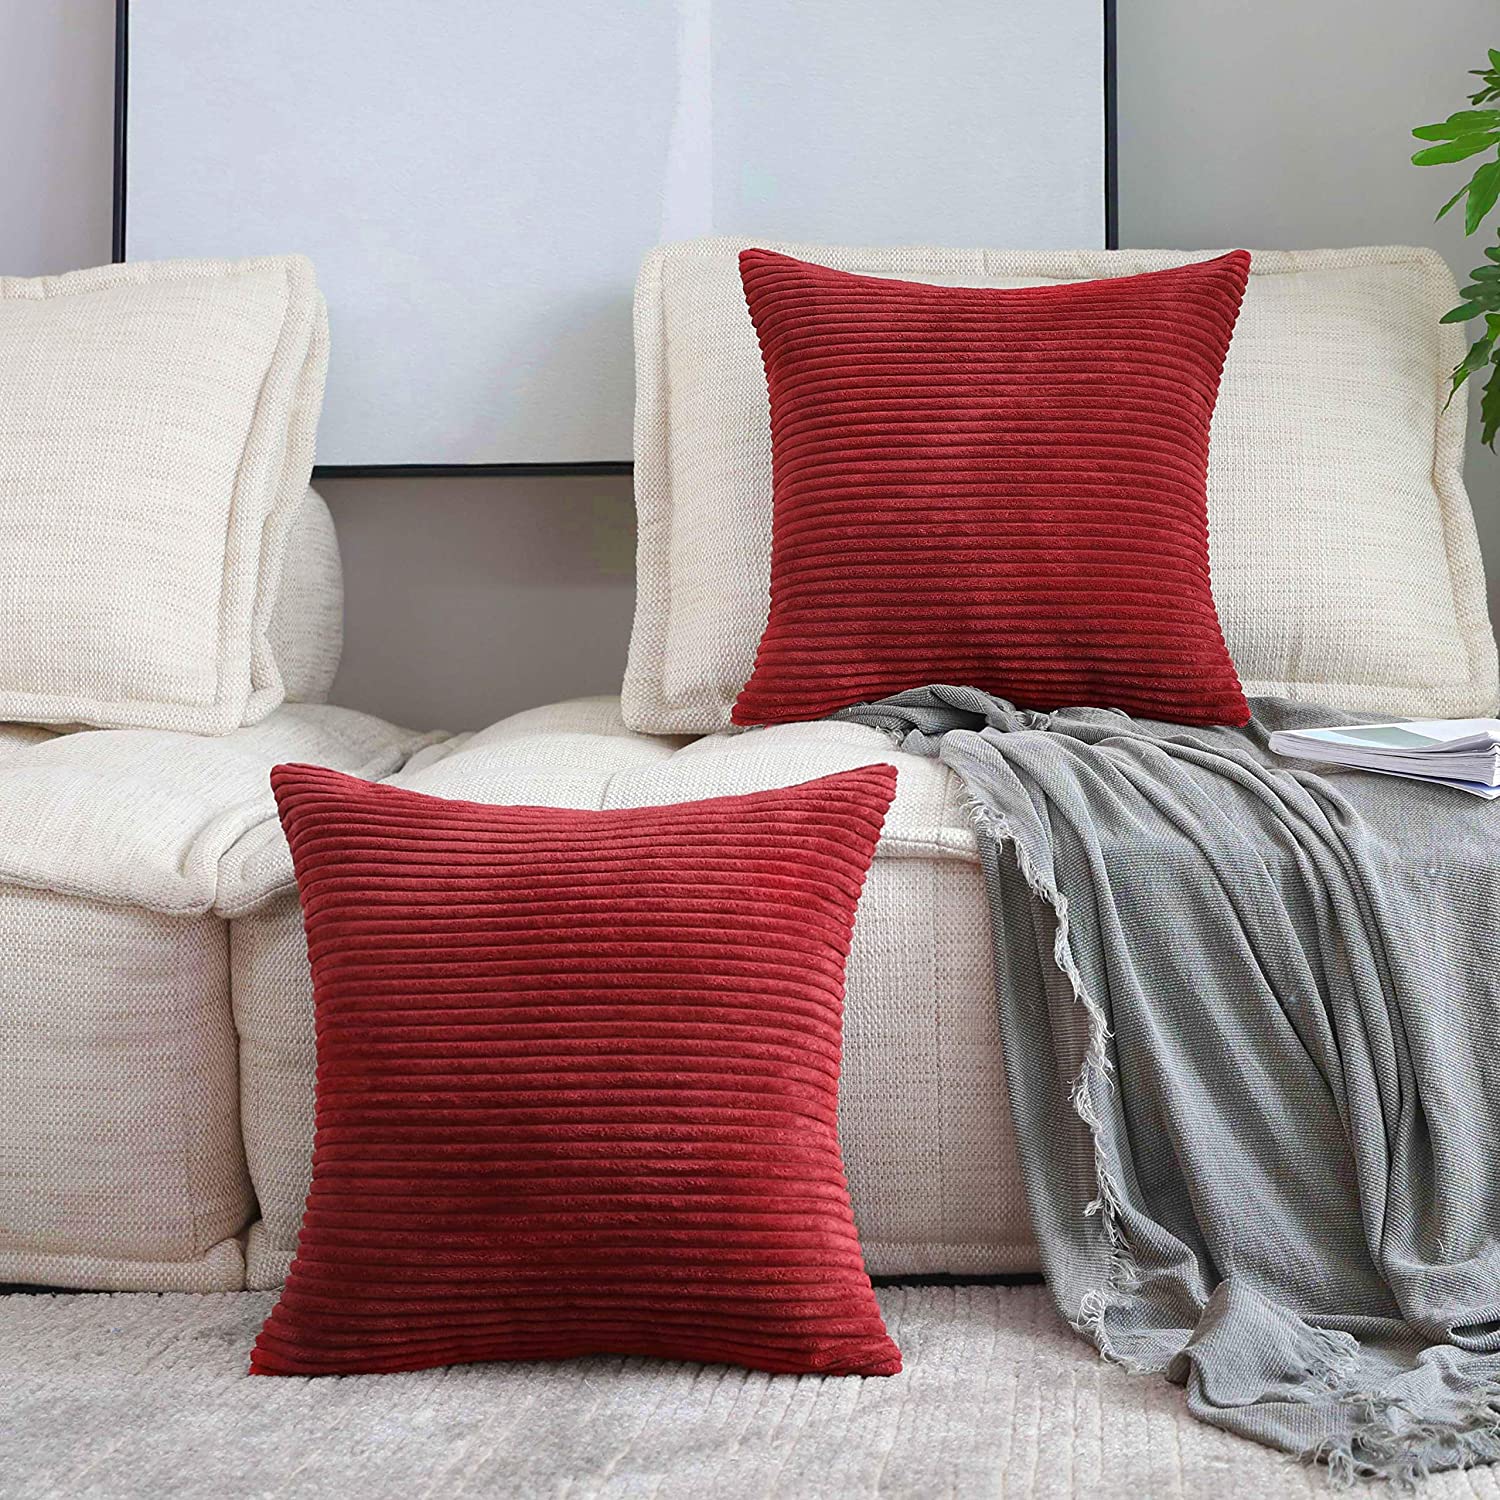  Home Brilliant Throw Pillows for Couch 18x18 Pillow